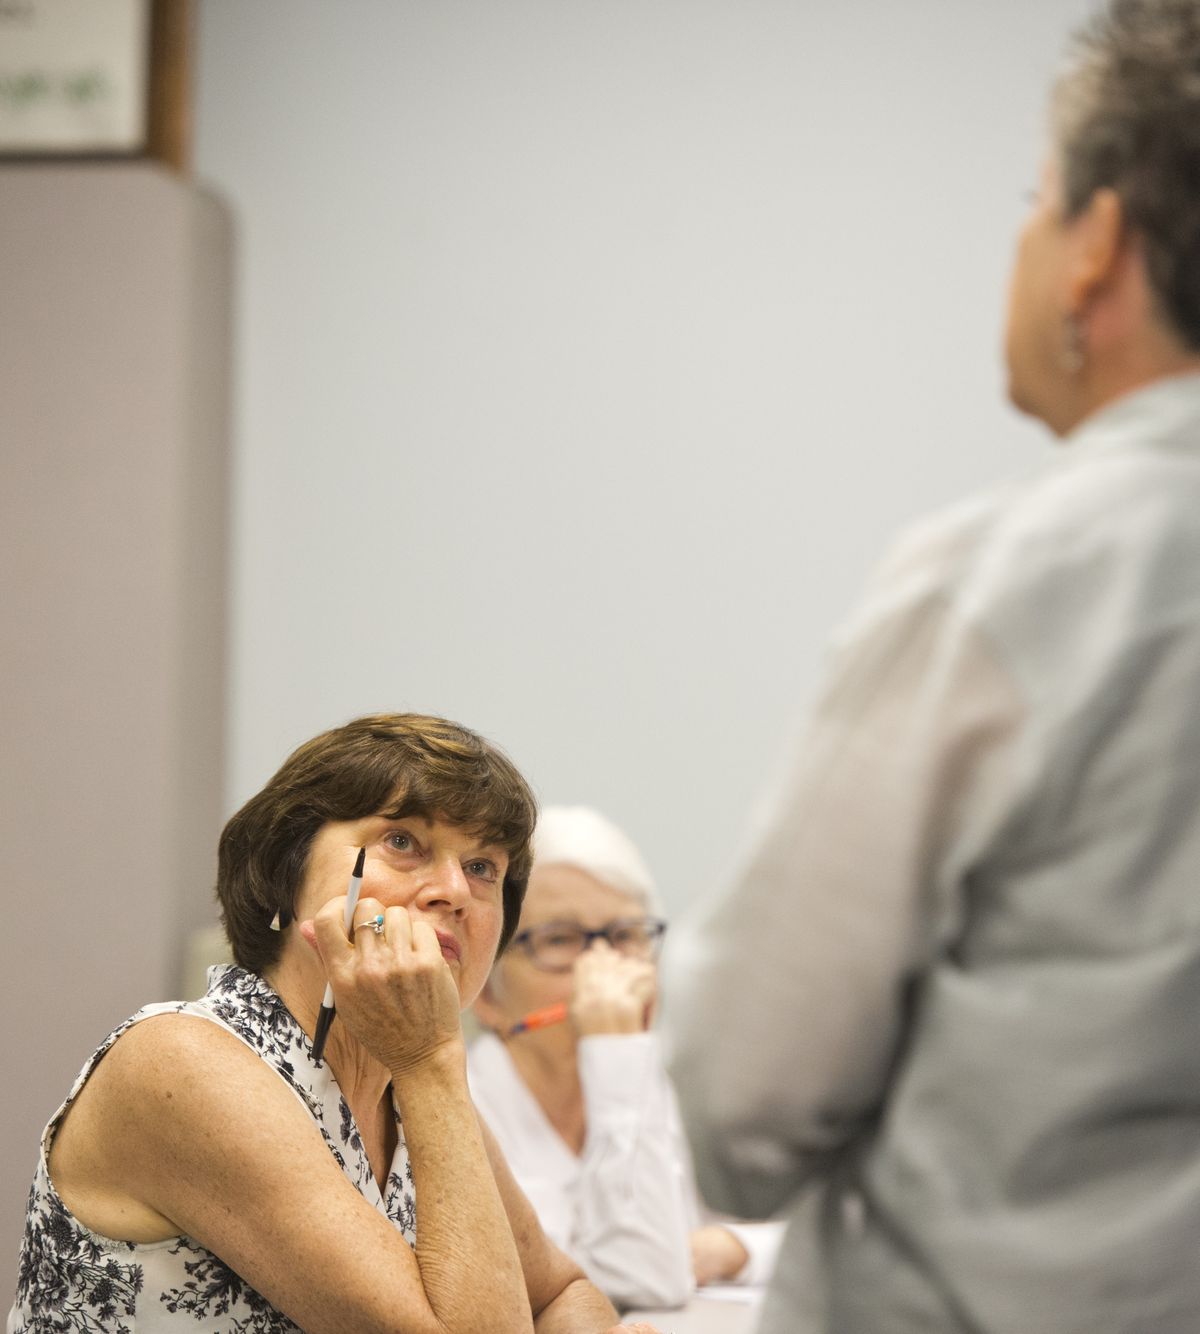 Linda King, left, a senior outreach volunteer, listens to Yolanda Lovato, director of planning and resources for Aging and Long Term Care of Eastern Washington, at a July 15 meeting. The ALTCEW offered an overview of funding for the agency’s next four years. (Jesse Tinsley)